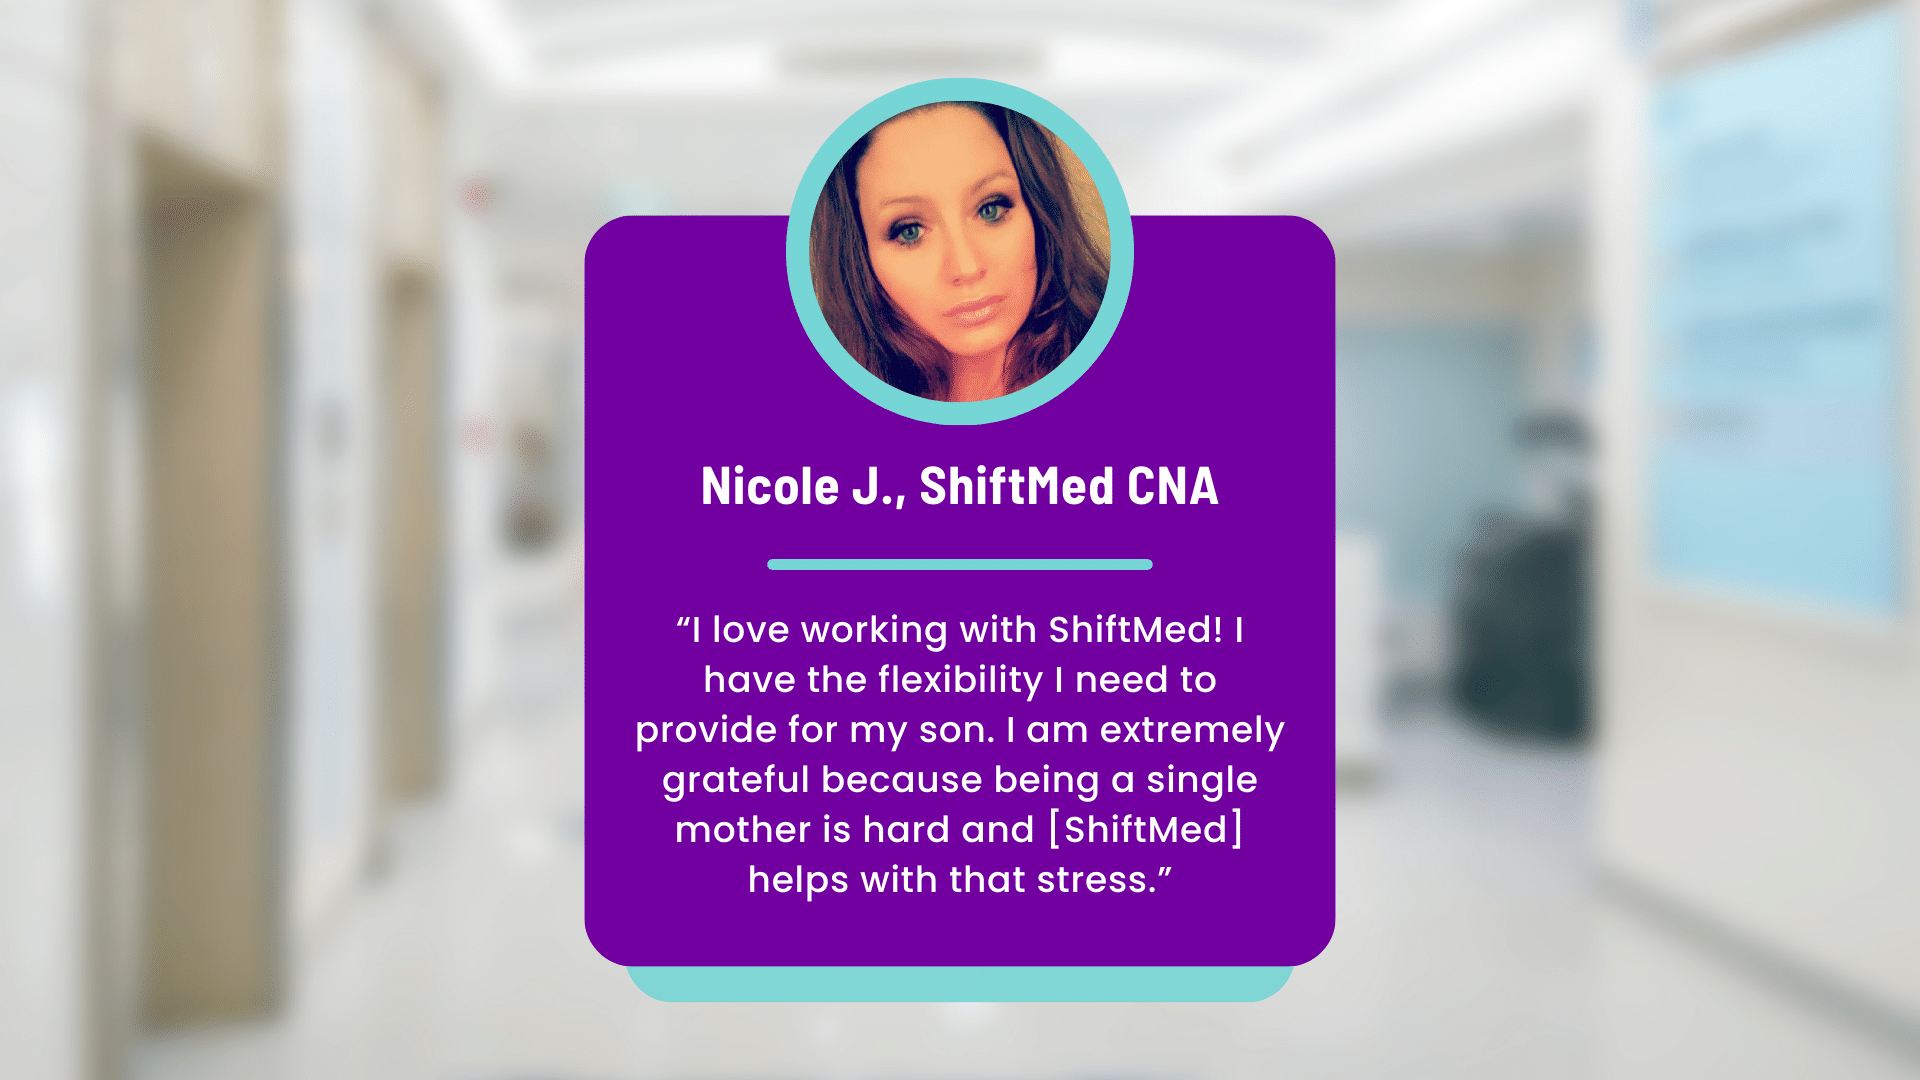 ShiftMed CNA Nicole J. talks about having the job flexibility she needs to care for her son.